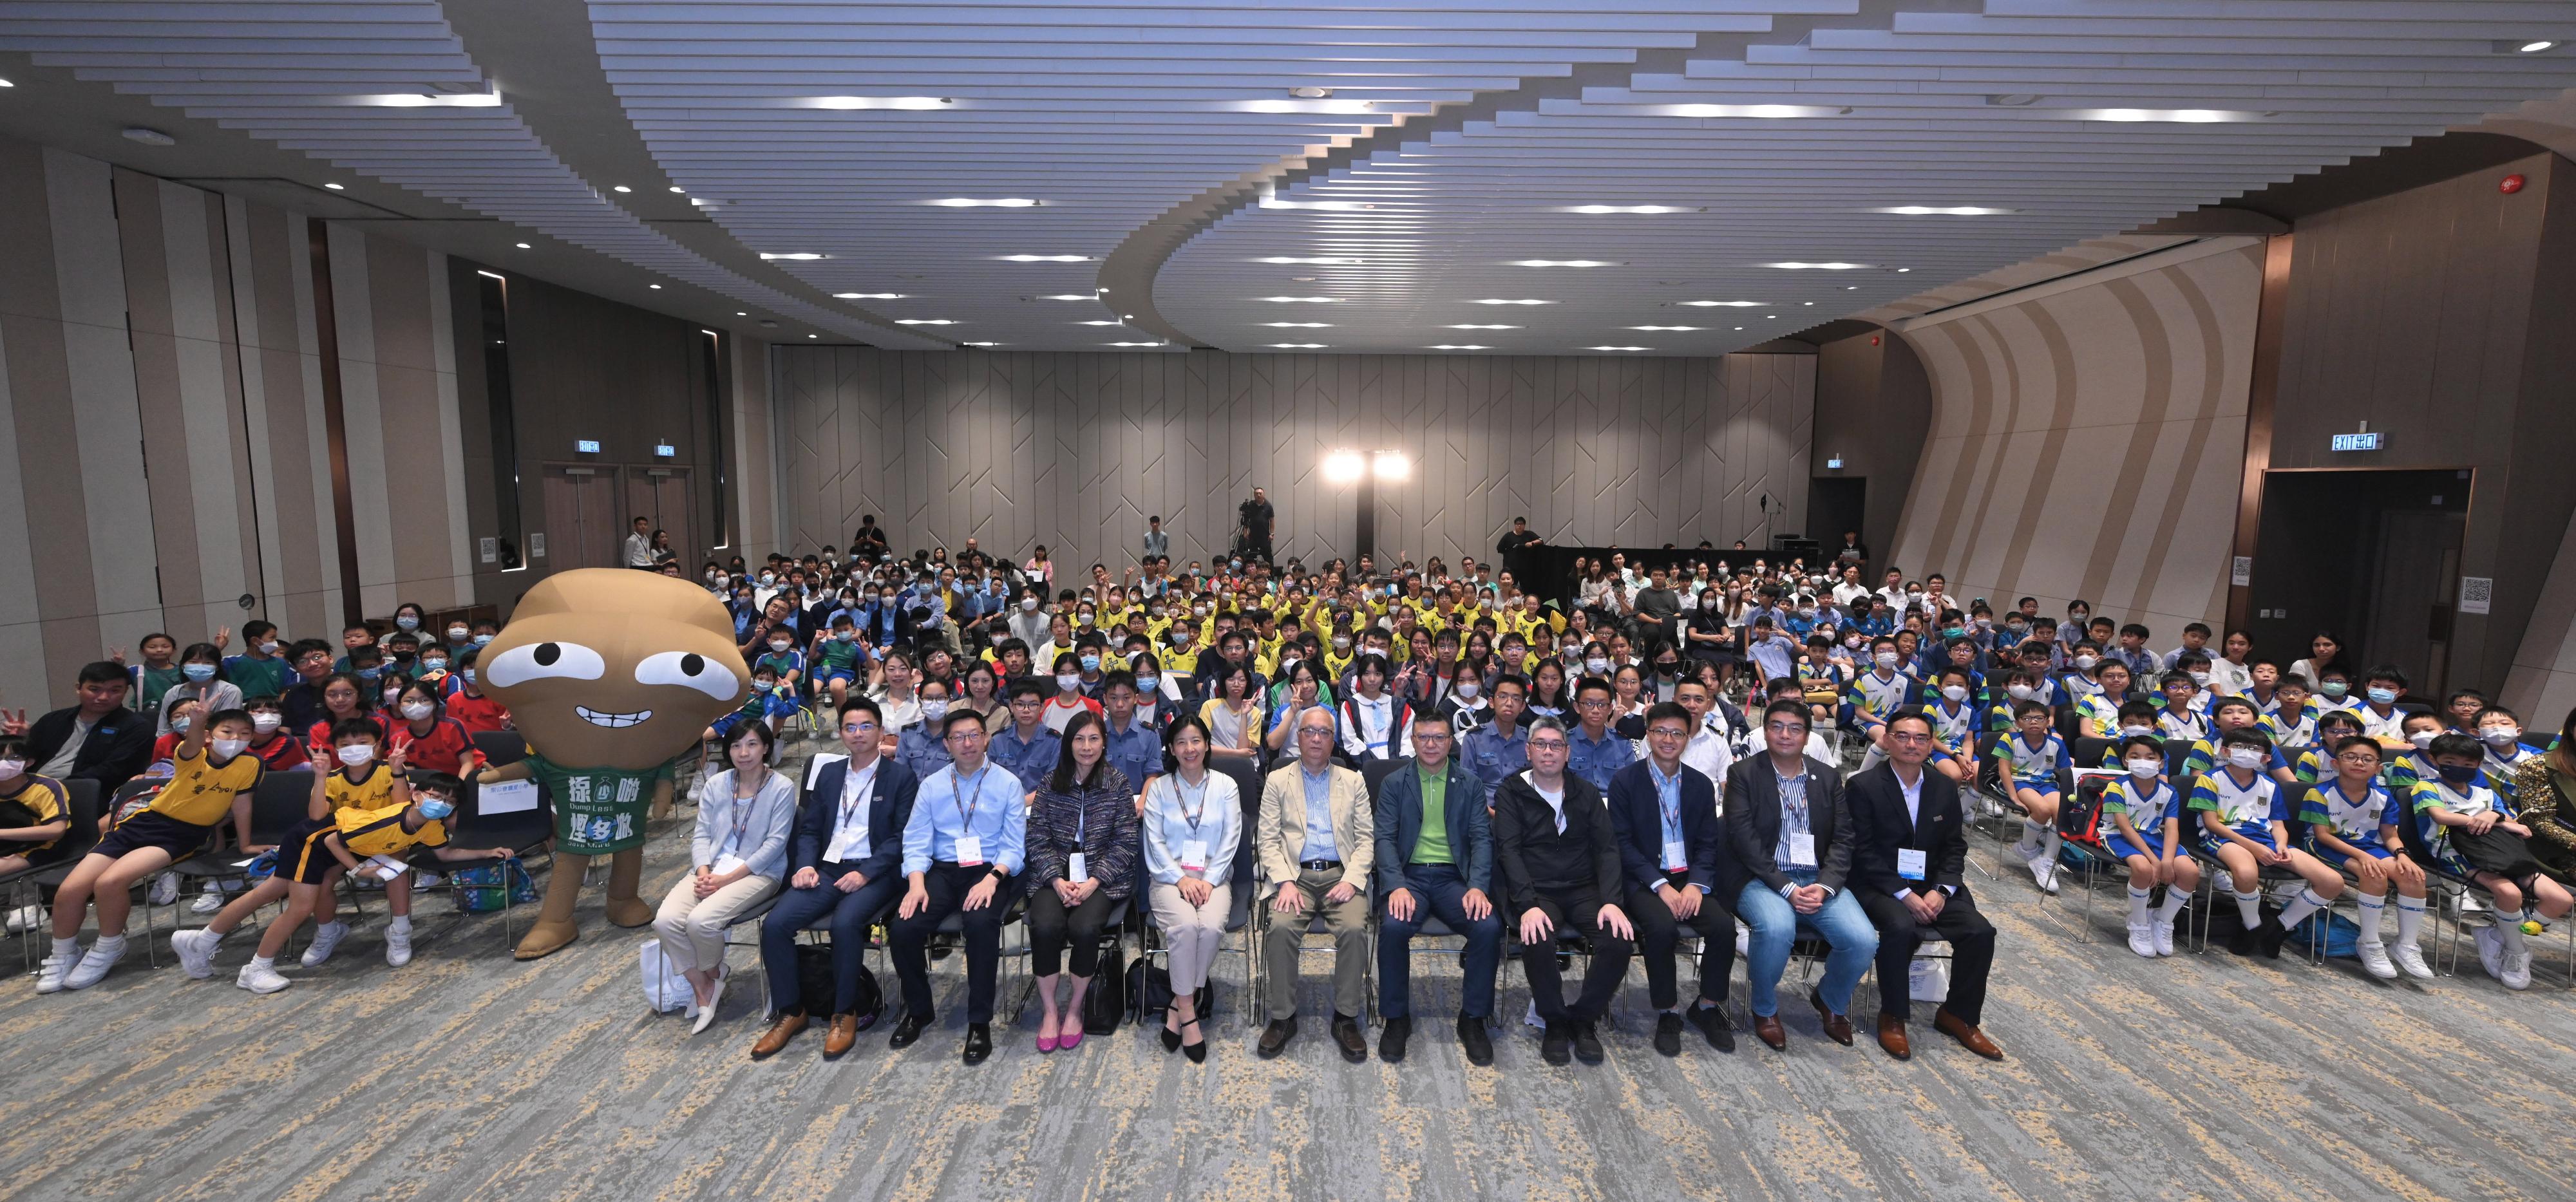 The Secretary for Environment and Ecology, Mr Tse Chin-wan (first row, centre), and the Director of the Department of Educational, Scientific and Technological Affairs of the Liaison Office of the Central People's Government in the Hong Kong Special Administrative Region, Ms Guo Jianhua (first row, fifth left), take a group photo with guests and young people during the "Dialogue with the Secretary for Environment and Ecology" session on the public day of the 18th Eco Expo Asia today (October 29).